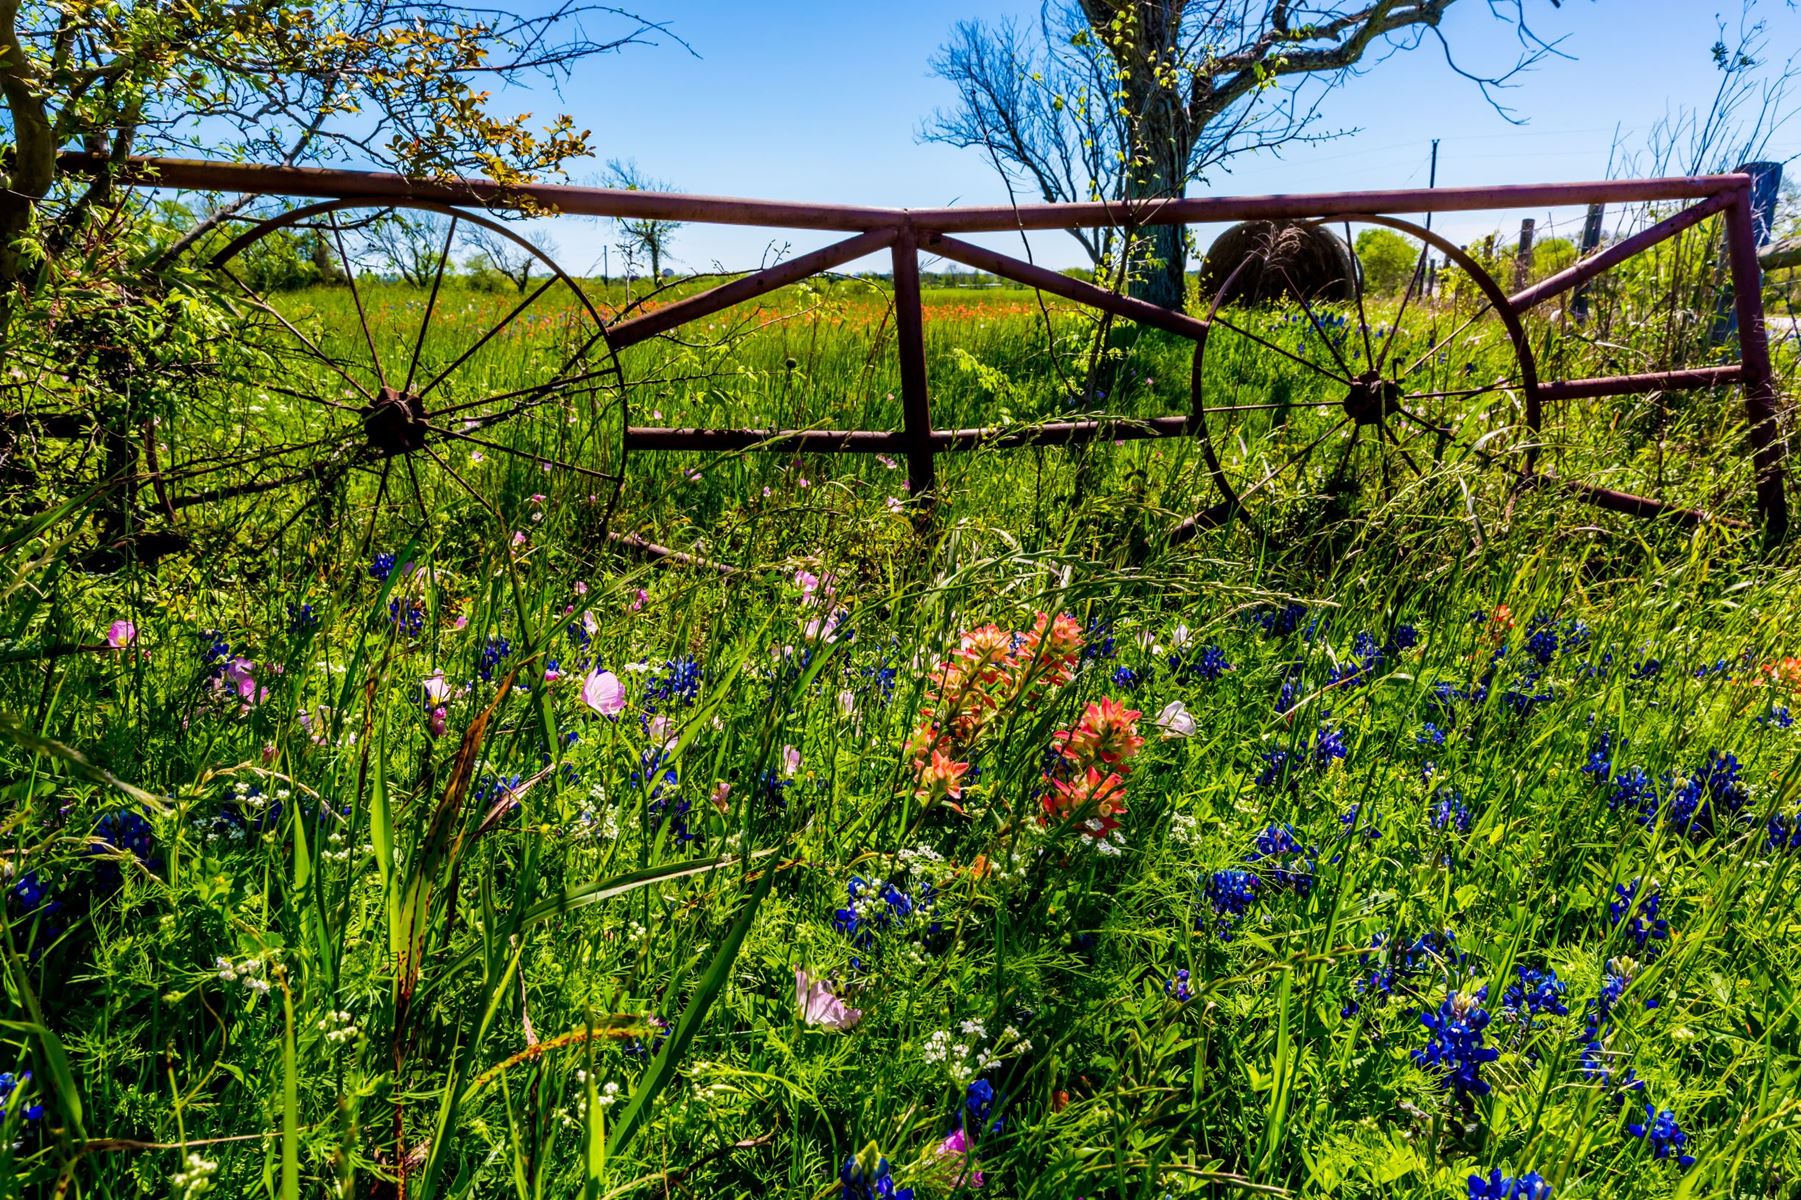 Rusty fence with wagon wheels leaned up on it, there are prairie flowers and weeds in the foreground